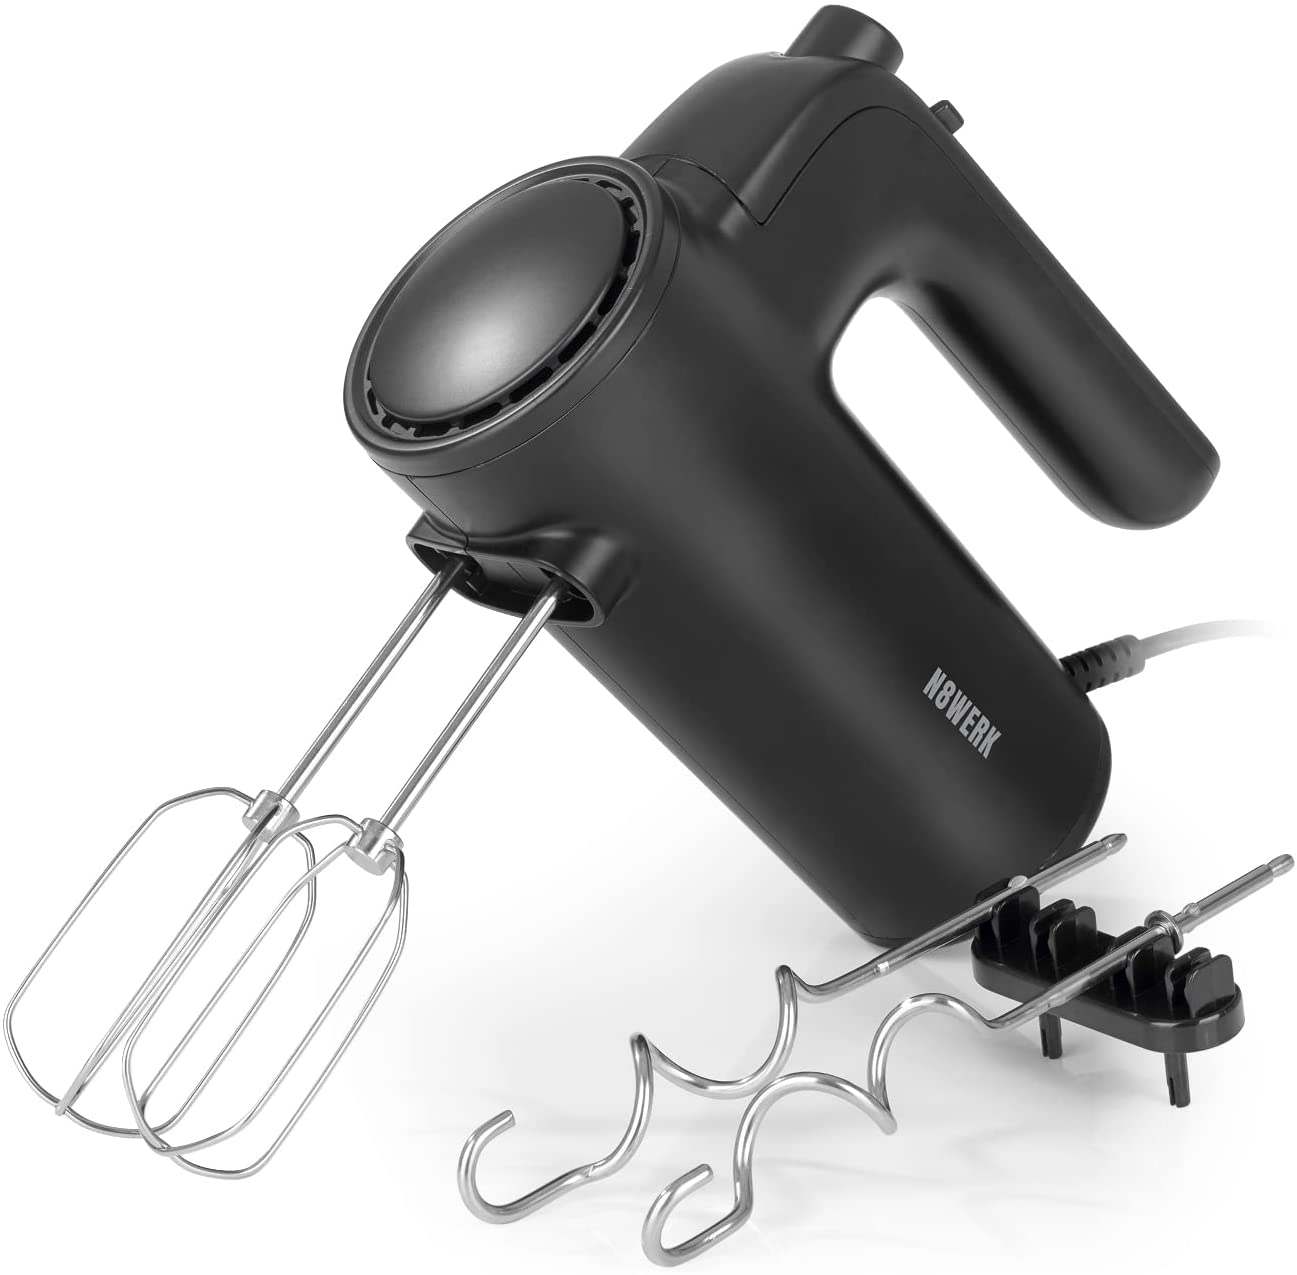 N8WERK 9049 Hand Mixer in the Midnight Edition | 2 Whisk and 2 Dough Hooks Made of Stainless Steel | 5 Speeds Plus Turbo Button | Holders for Inserts | 400 Watt